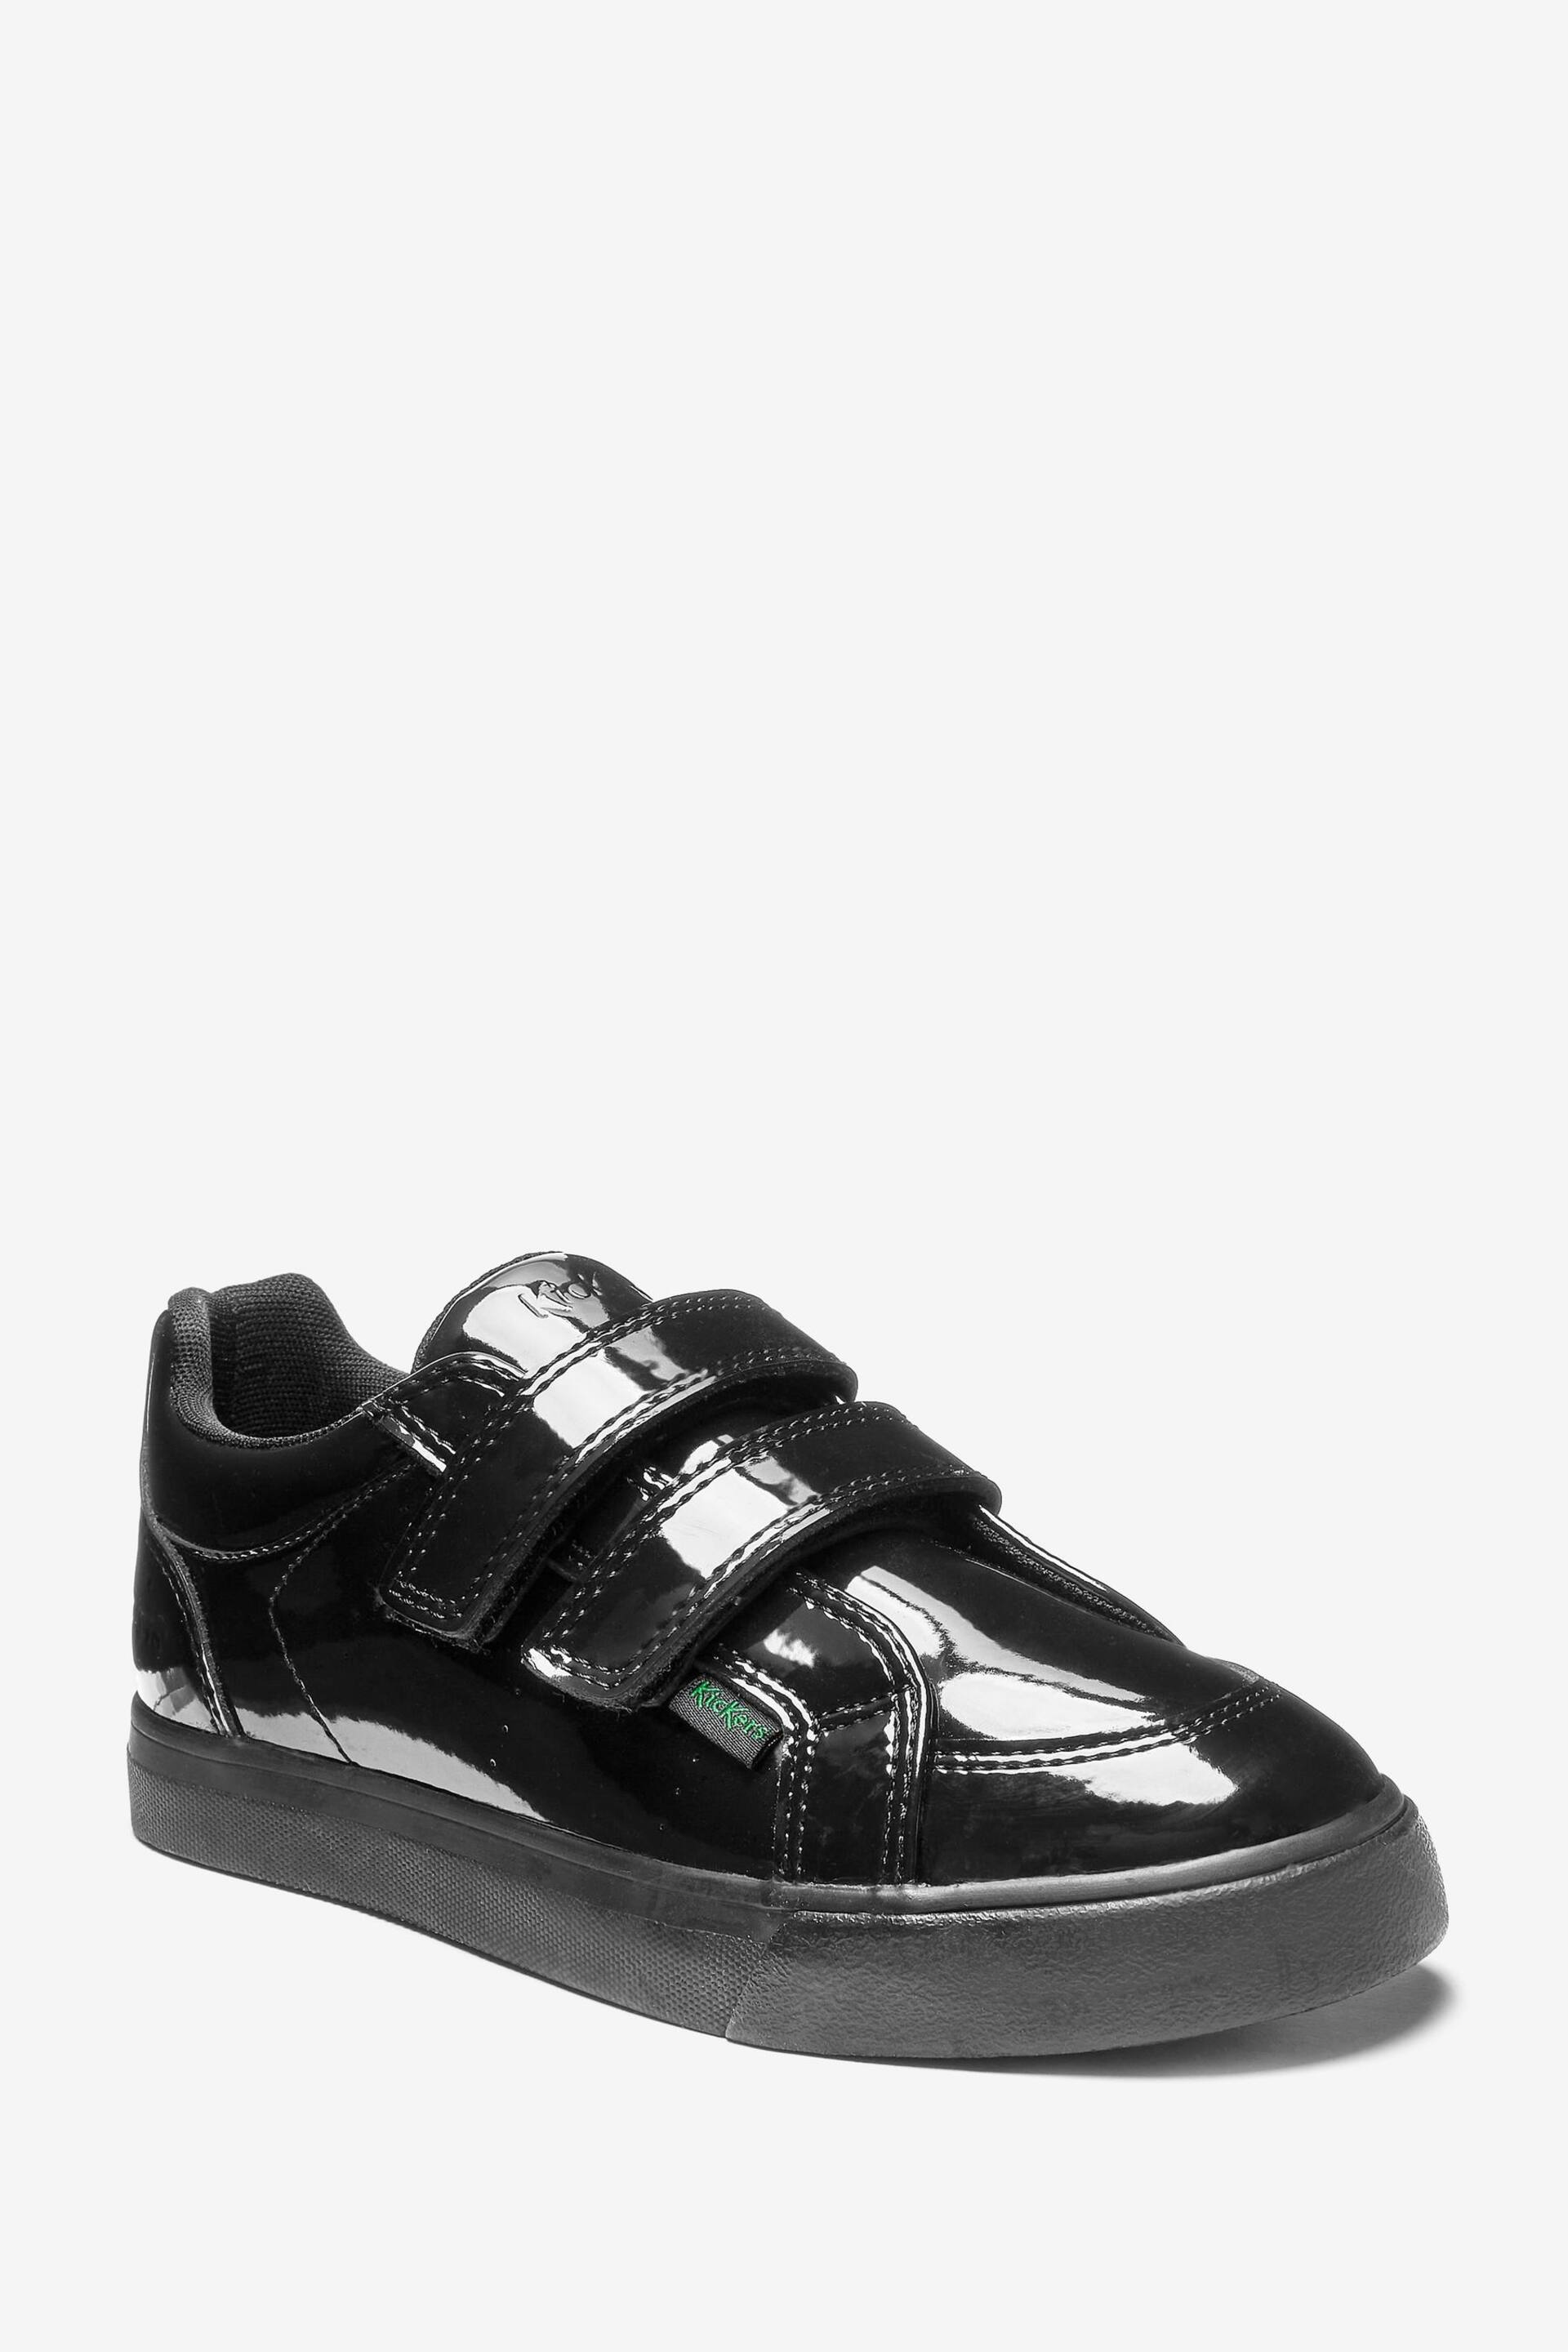 Kickers Junior Tovni Twin Strap Patent Leather Black Trainers - Image 2 of 8